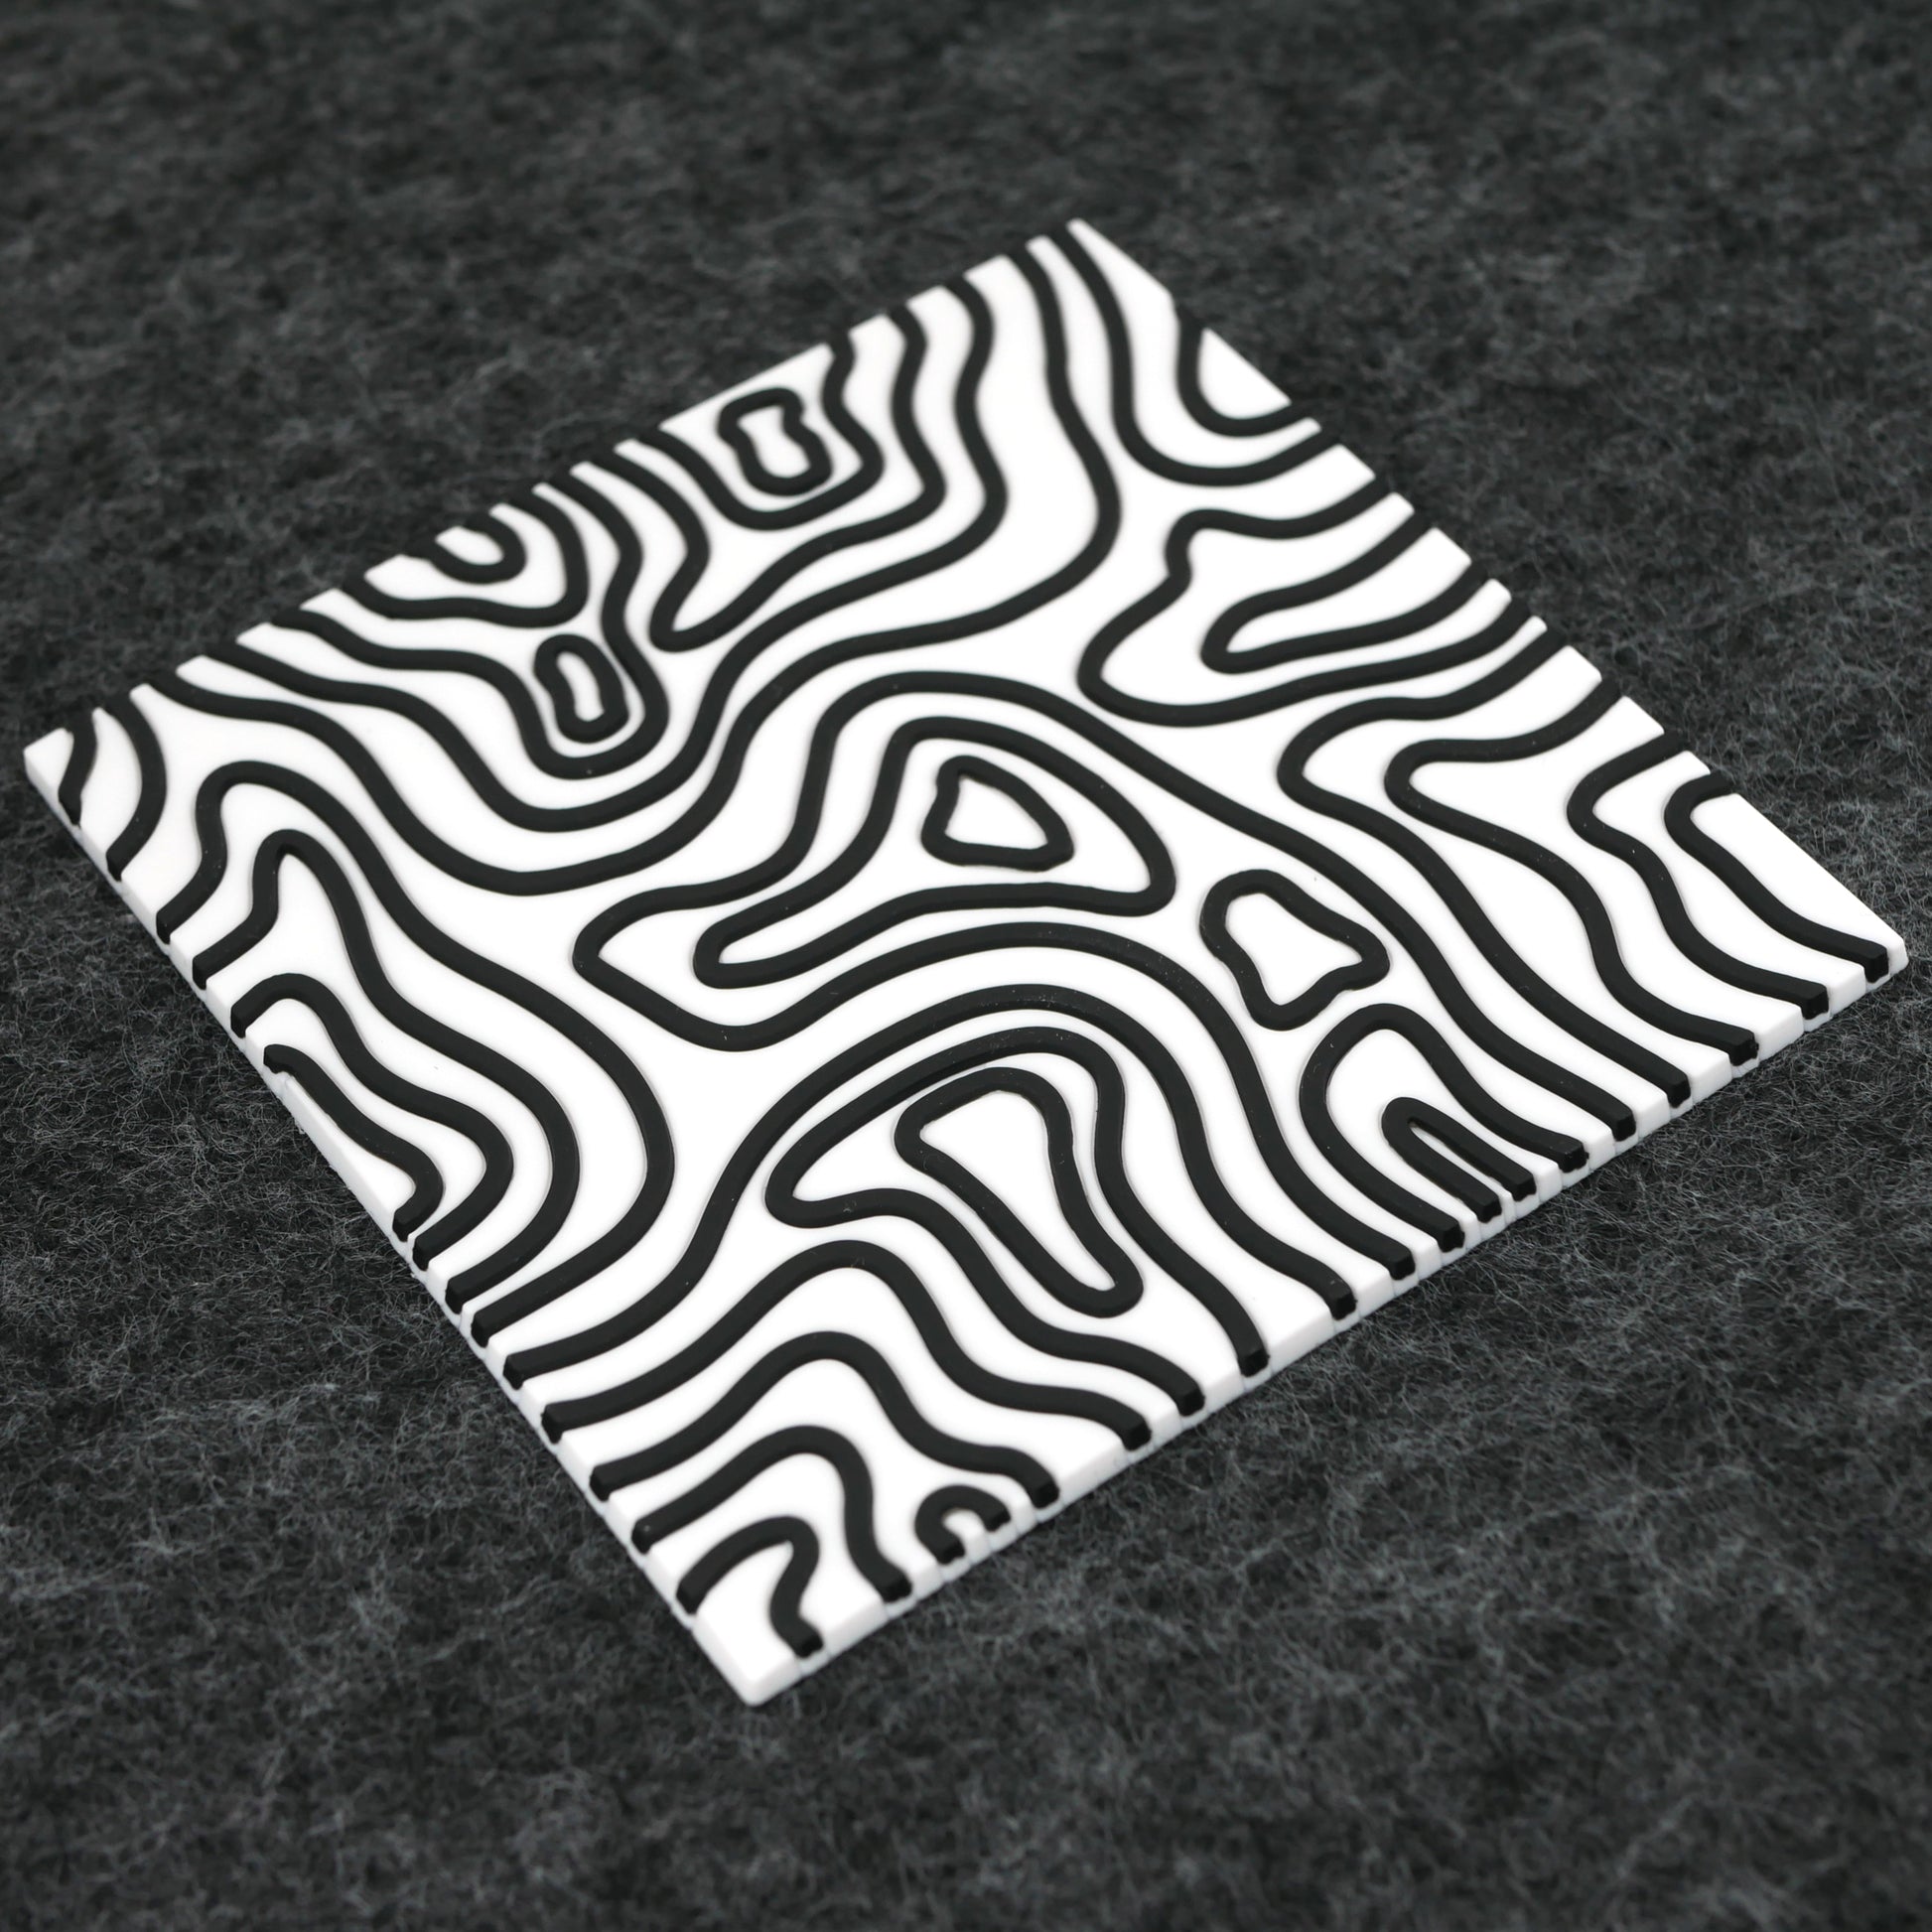 A square white topographic PVC rubber coaster sitting at an angle on a gray desk mat.